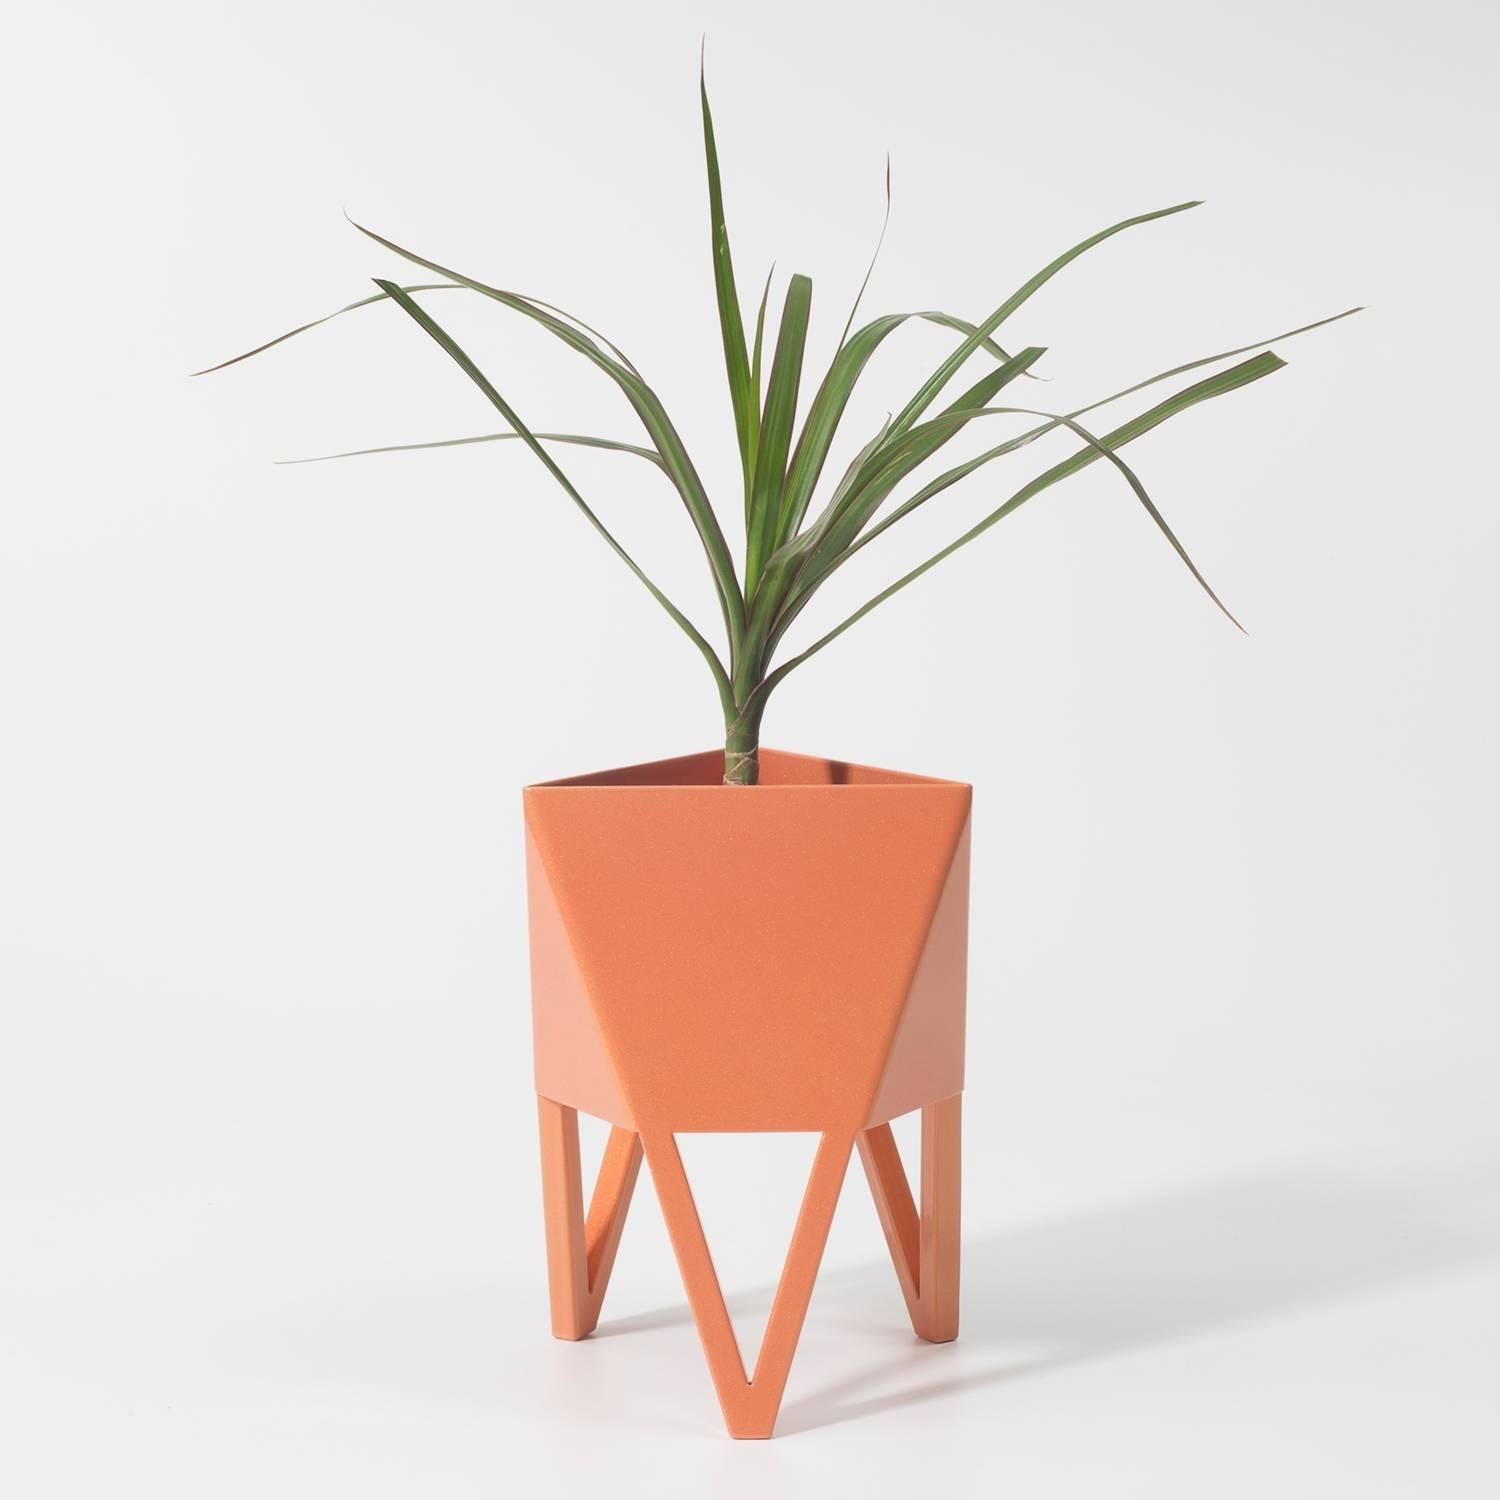 Deca Planter in Light Pink Steel, Medium, by Force/Collide 2